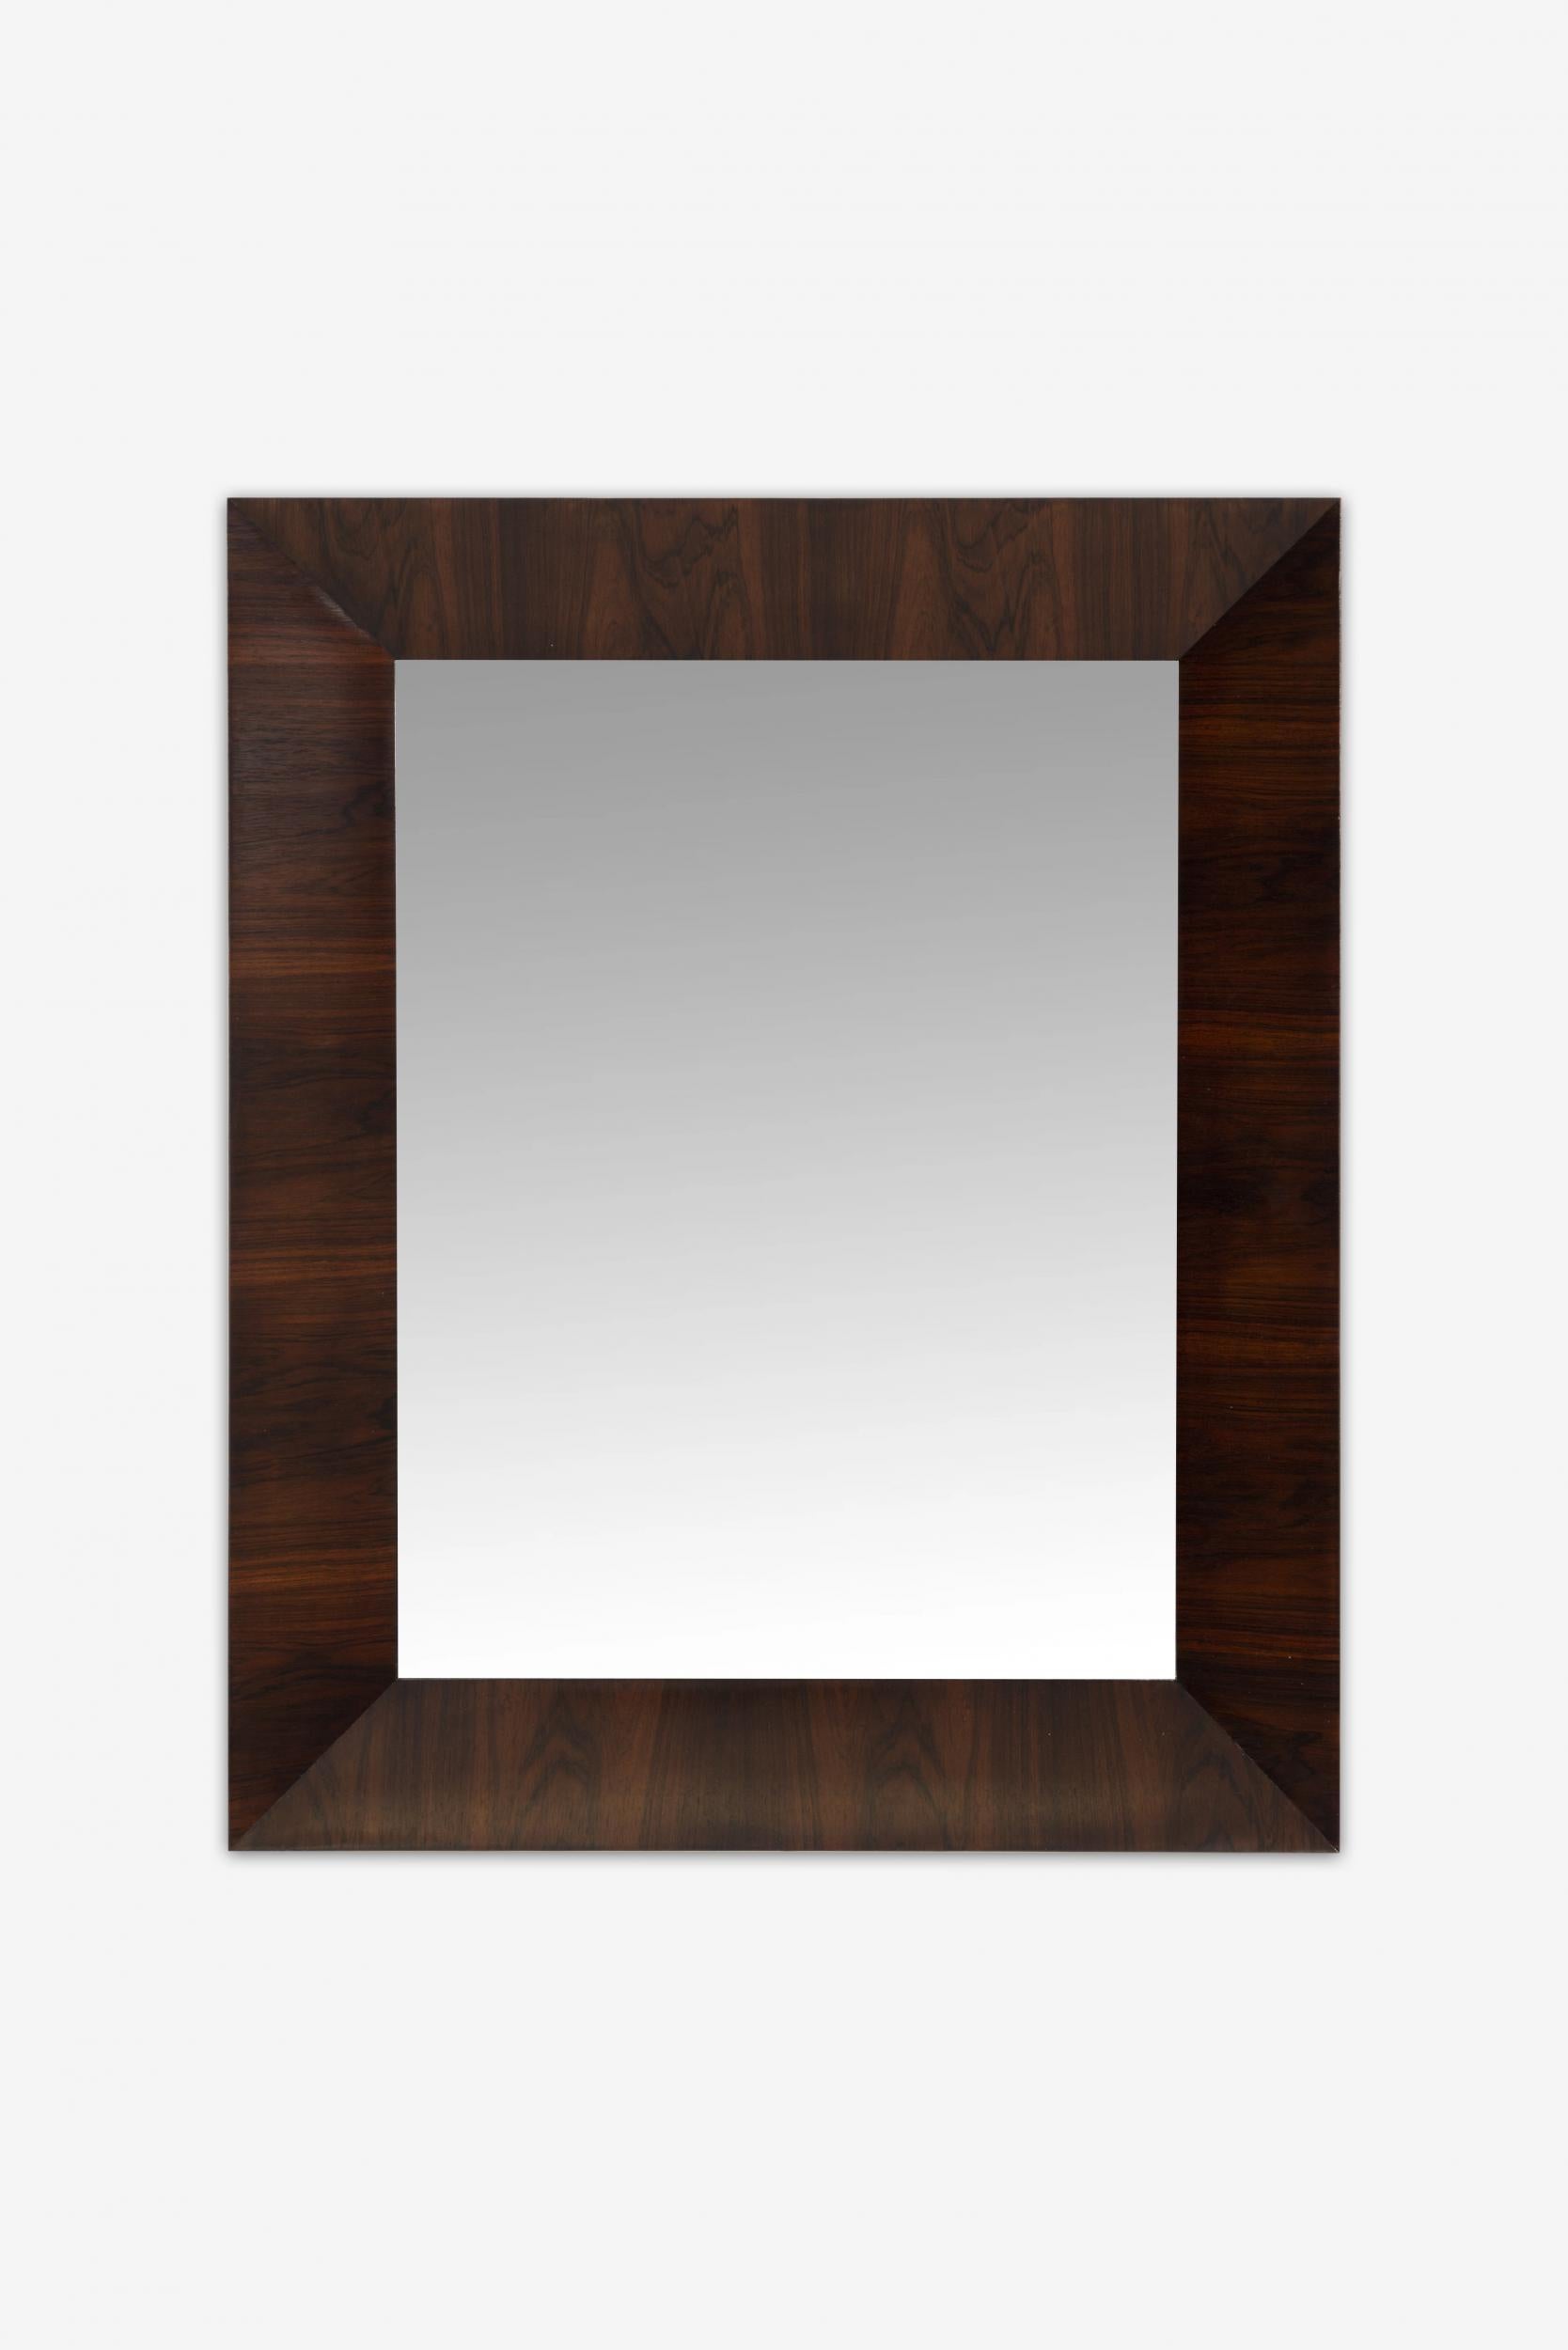 Edward Wormley rosewood mirror, rare model 4462, highly figured grained rosewood. Beveled design picture frame style.
Can be displayed vertical or horizontal.
Signed with label on backside and branded Dunbar.